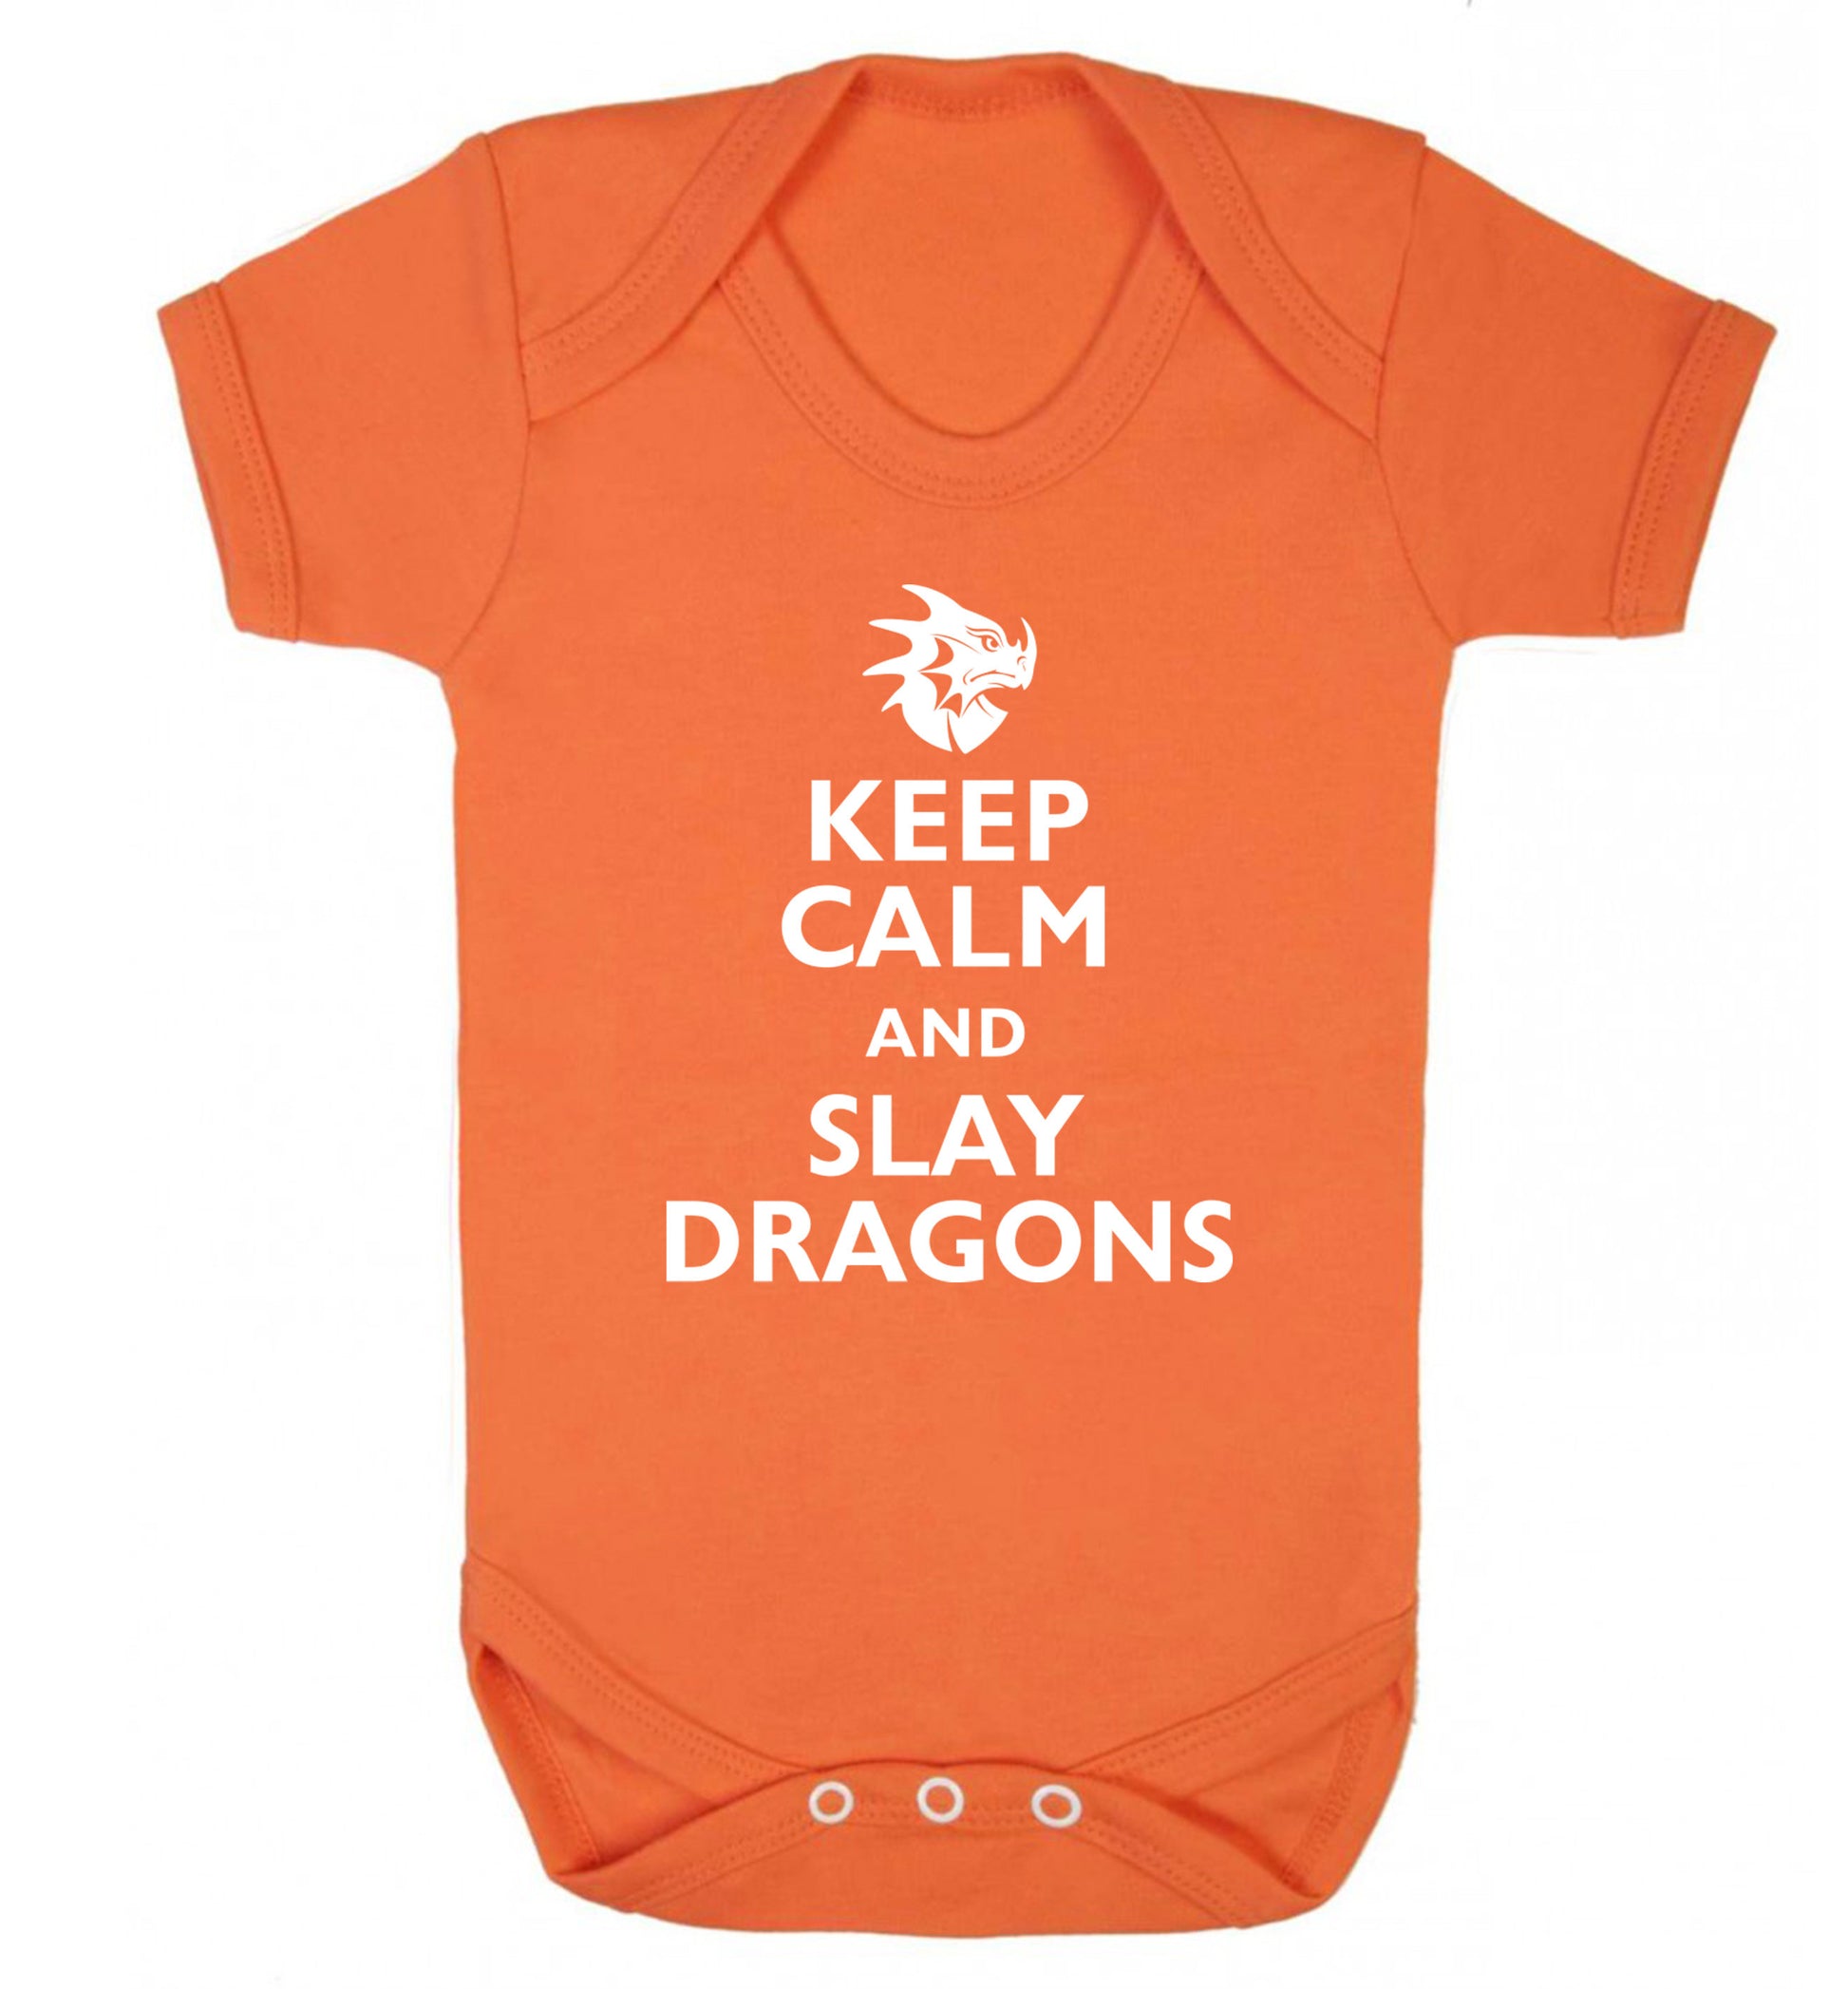 Keep calm and slay dragons Baby Vest orange 18-24 months